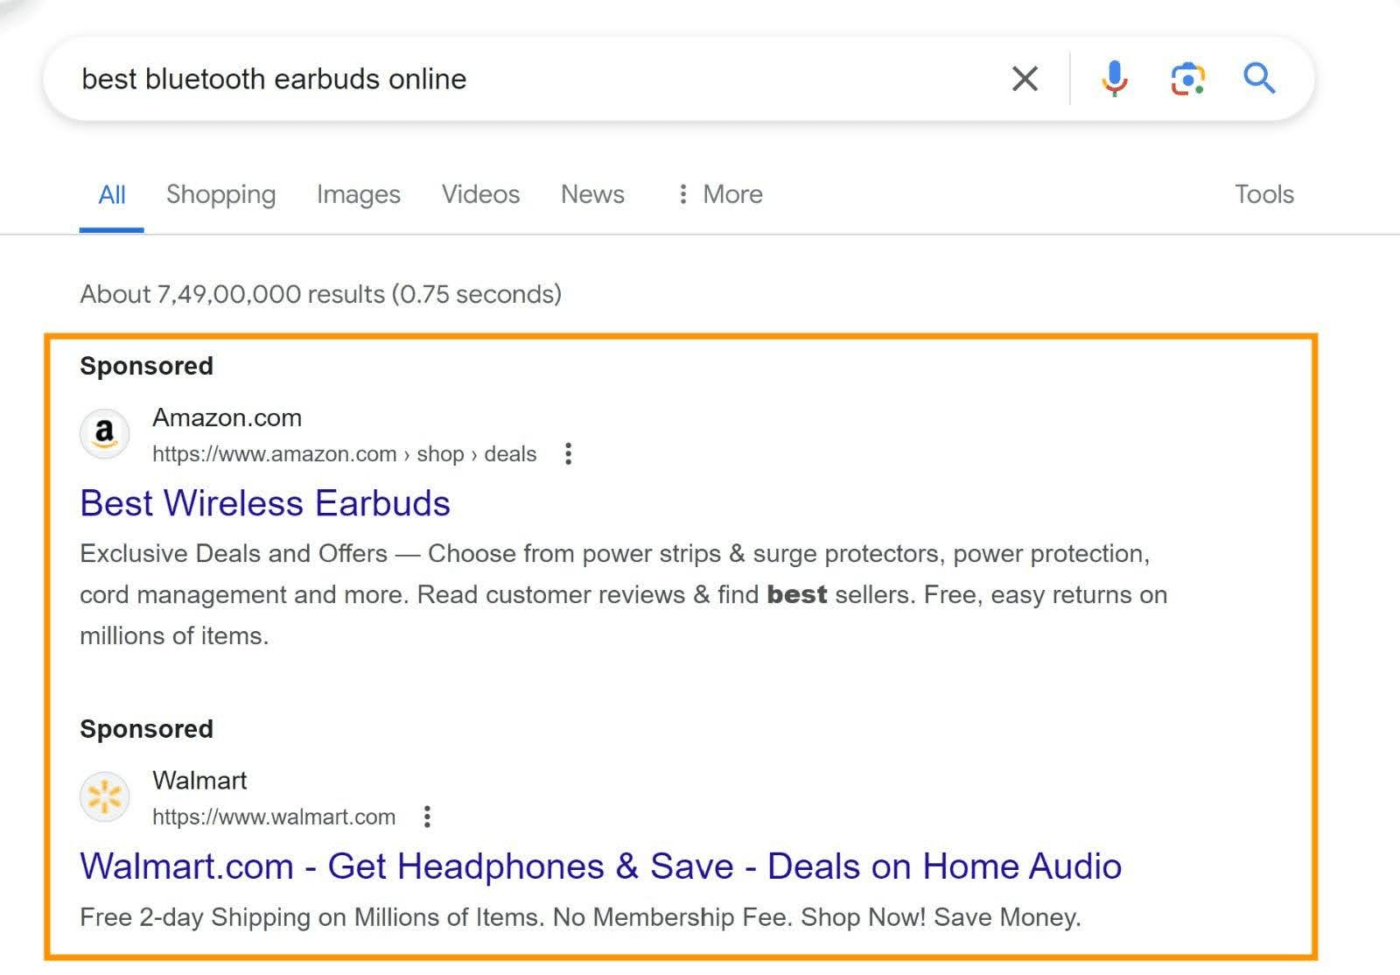 SERP page results showing sponsored ads at the top